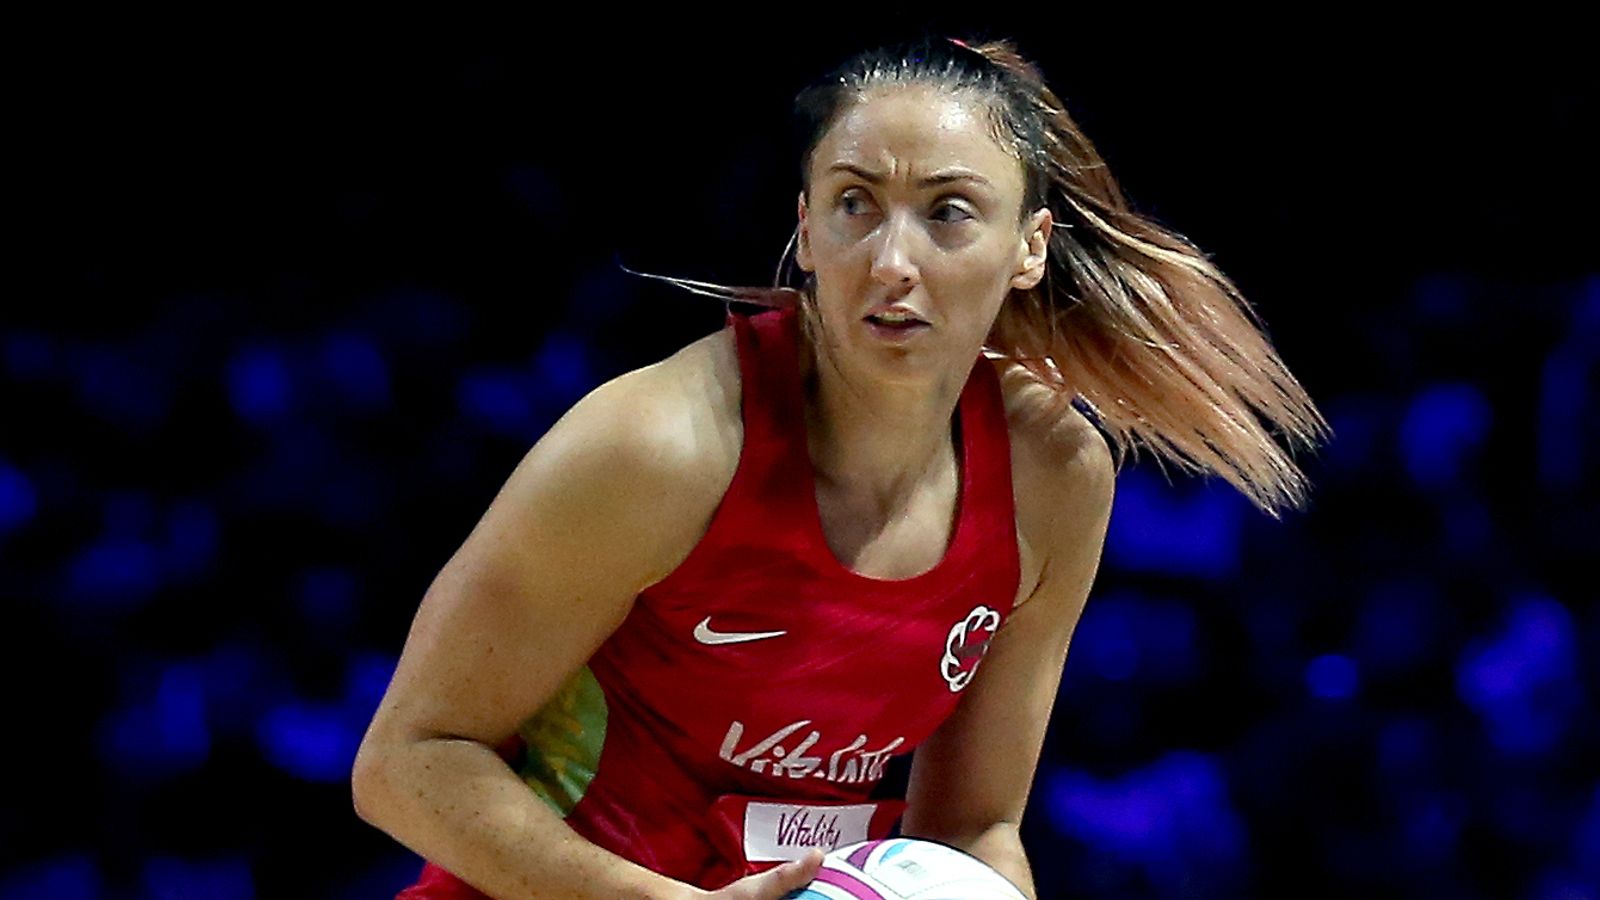 Commonwealth Games: Netball schedule and squads for tournament in Birmingham